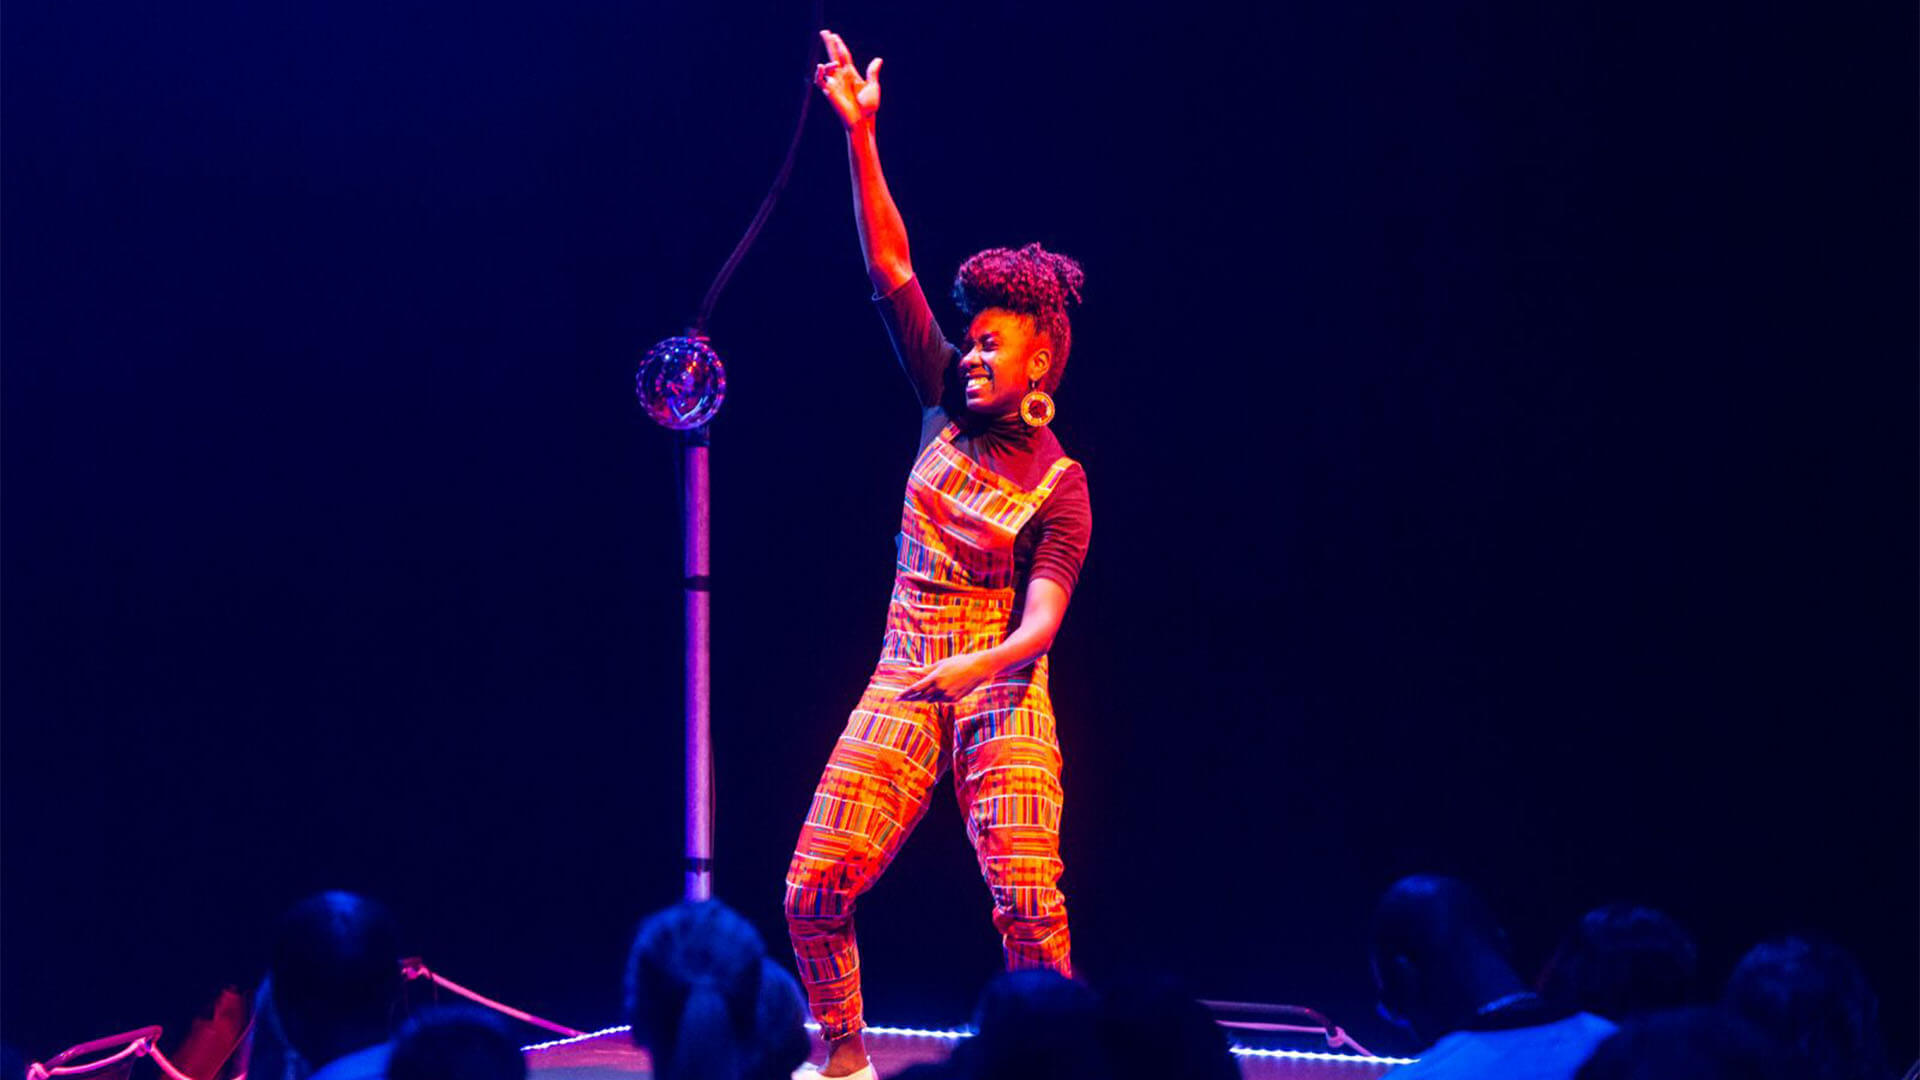 An African British female wearing orange dungarees with colourful rectangular patterns raises her arm powerfully on the dance floor, the crowd surround her.